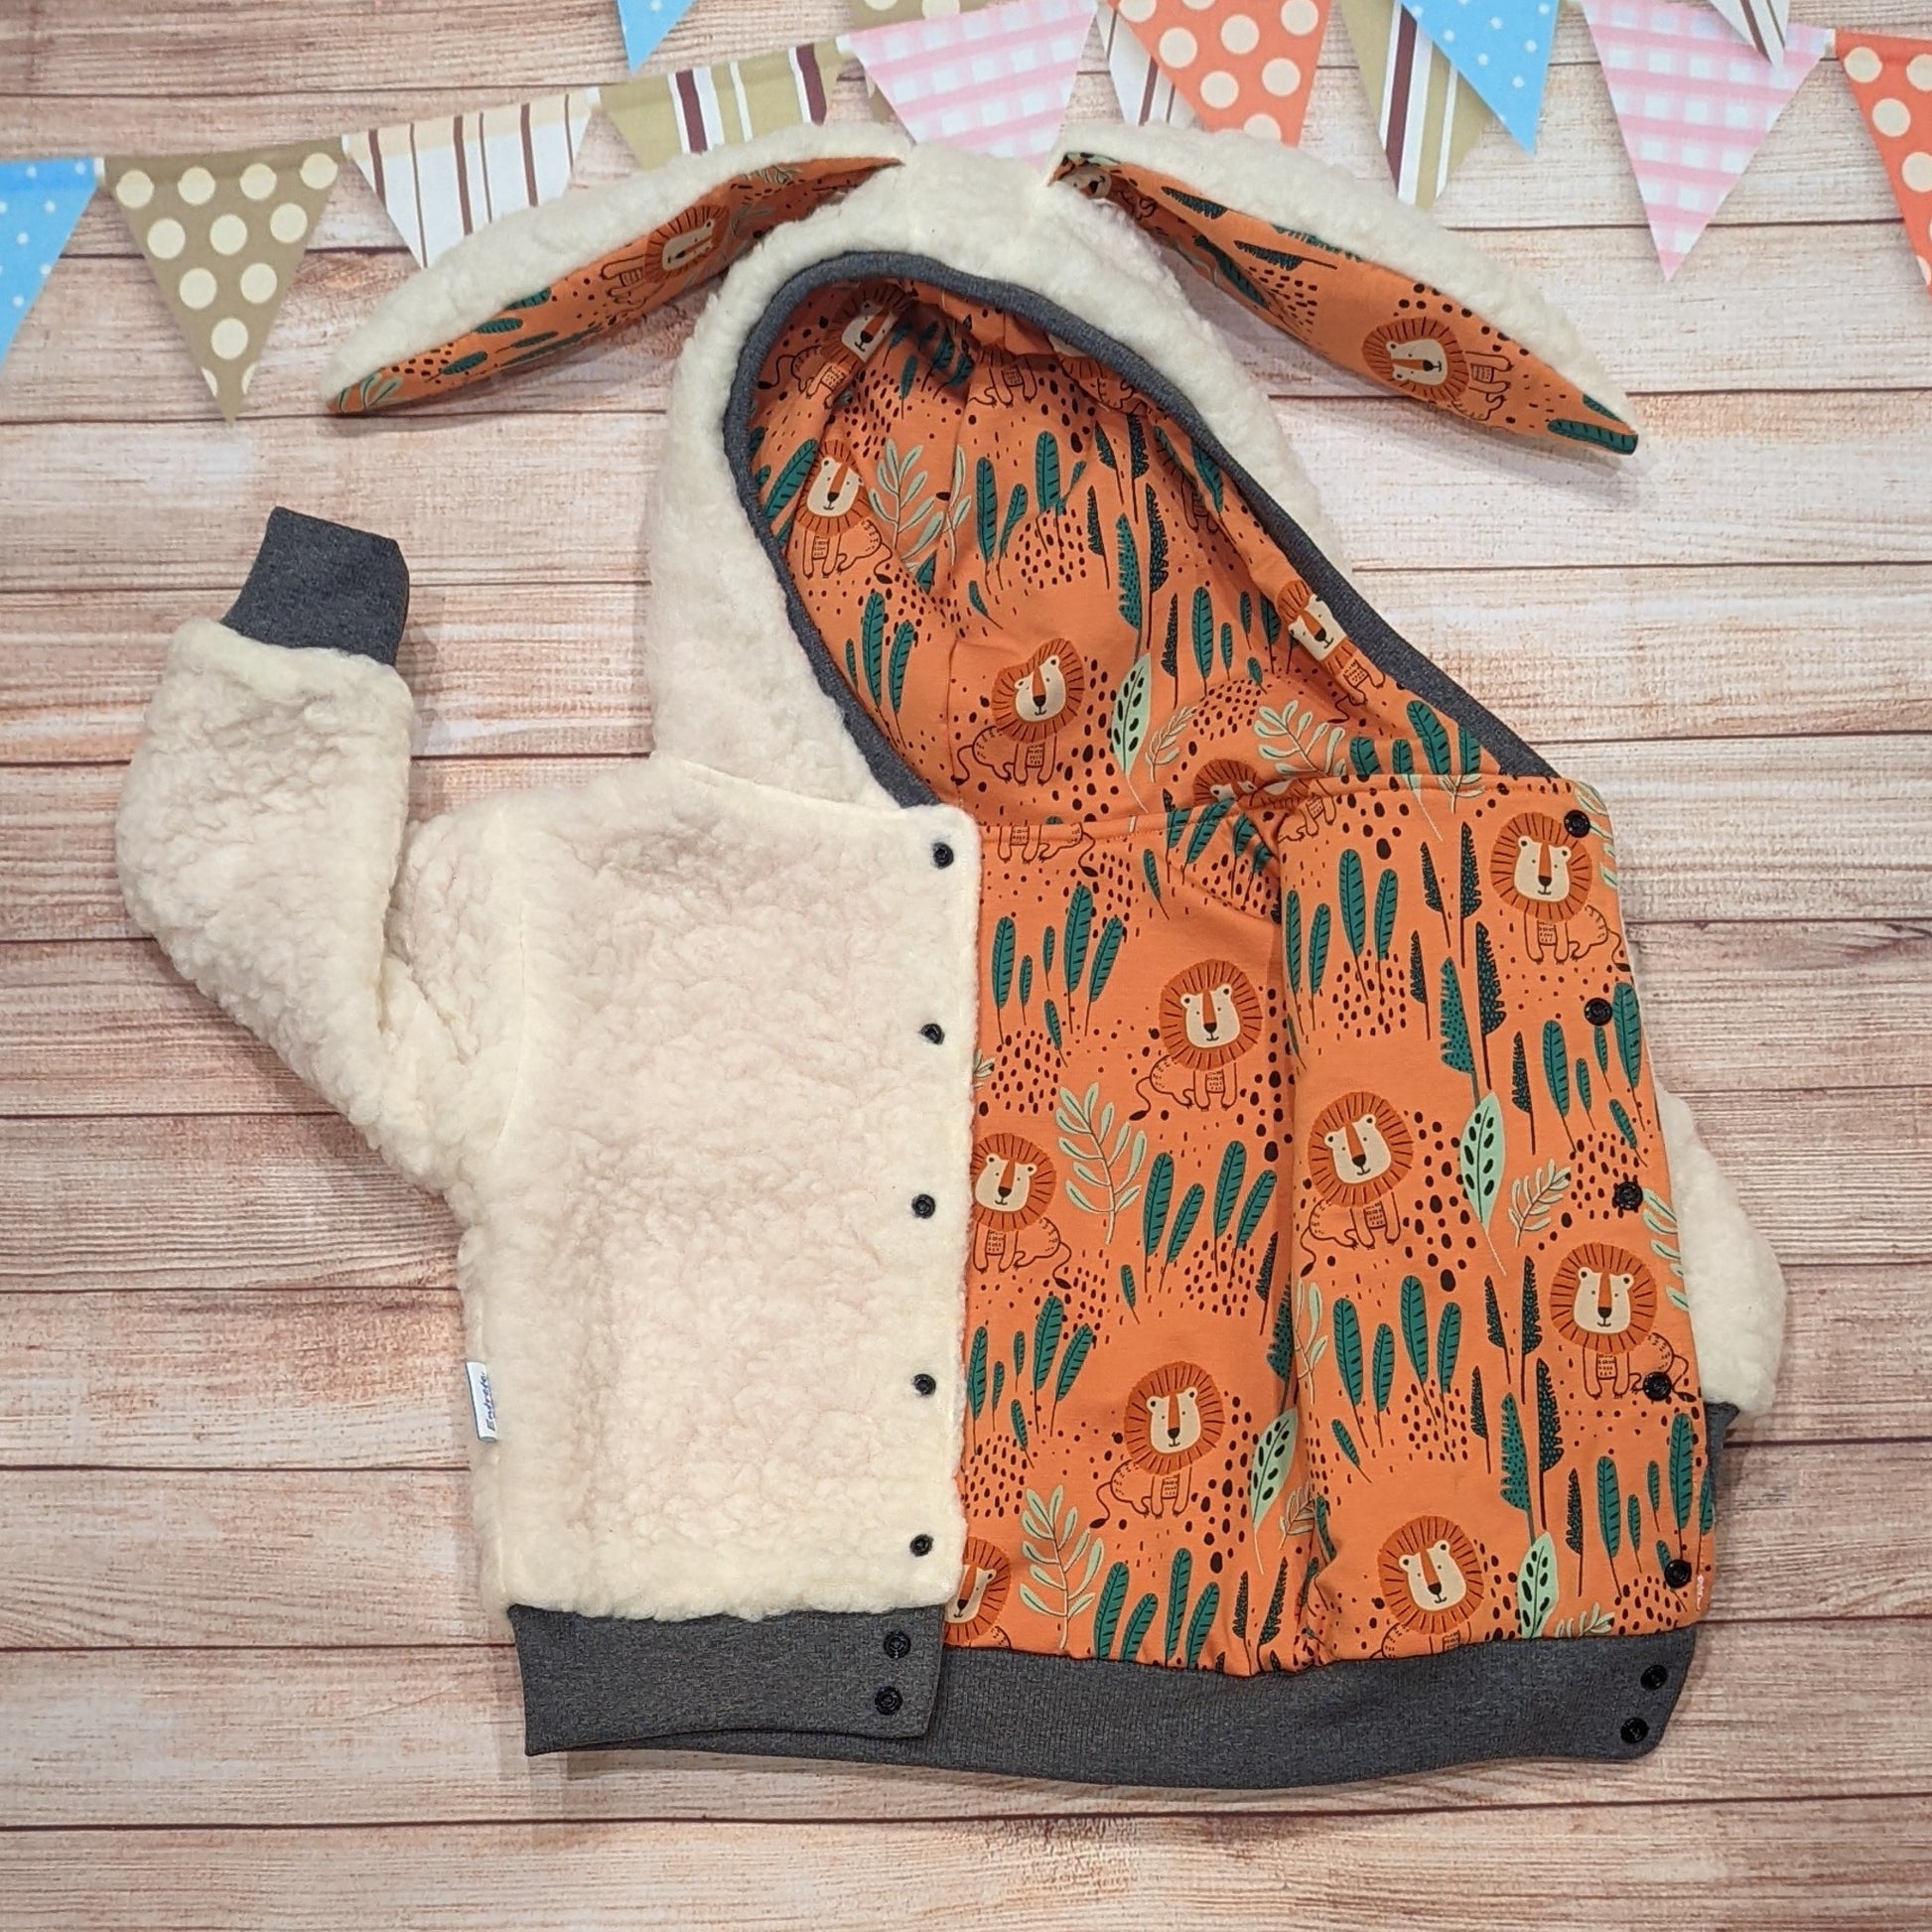 The gorgeous sherpa and orange lions reversible bunny hoodie. Handmade using sherpa fur, graphite ribbing and orange lions cotton French terry. Featuring front poppers and adorable bunny ears on the hood. Shown with poppers open, showing the orange lions reverse side.